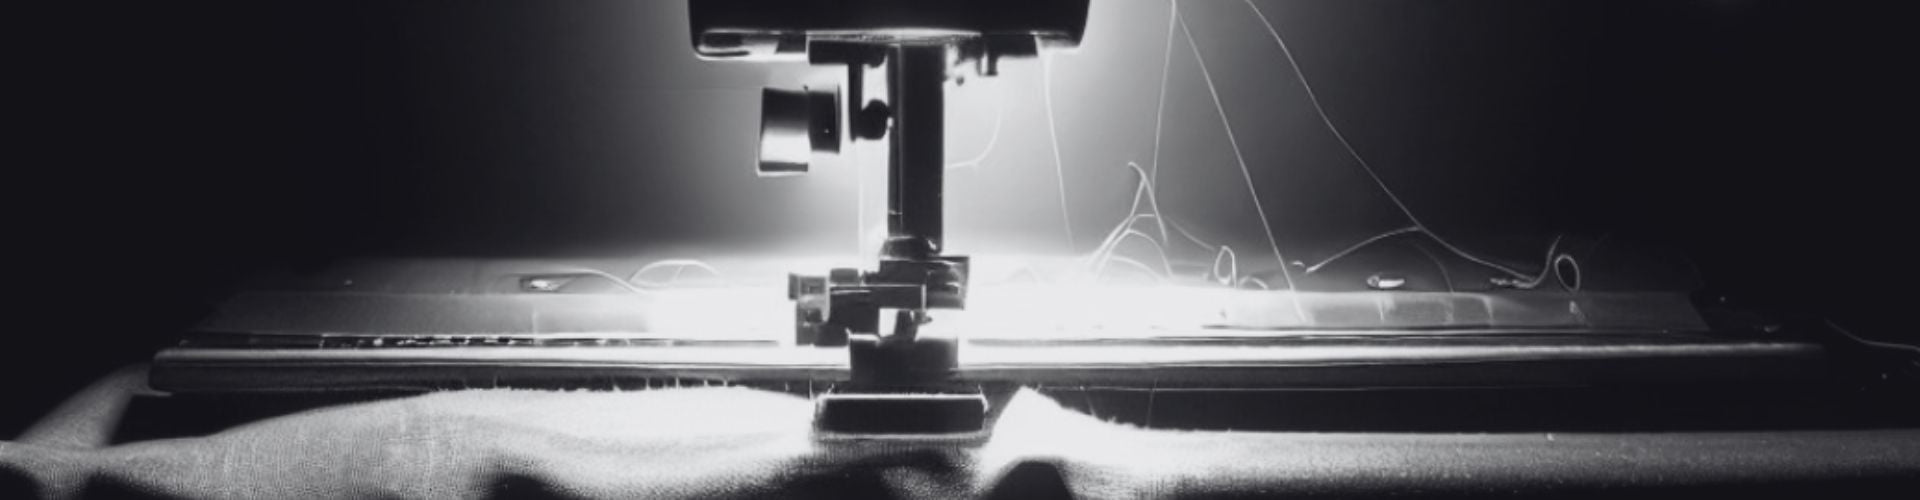 Image of a sewing machine working